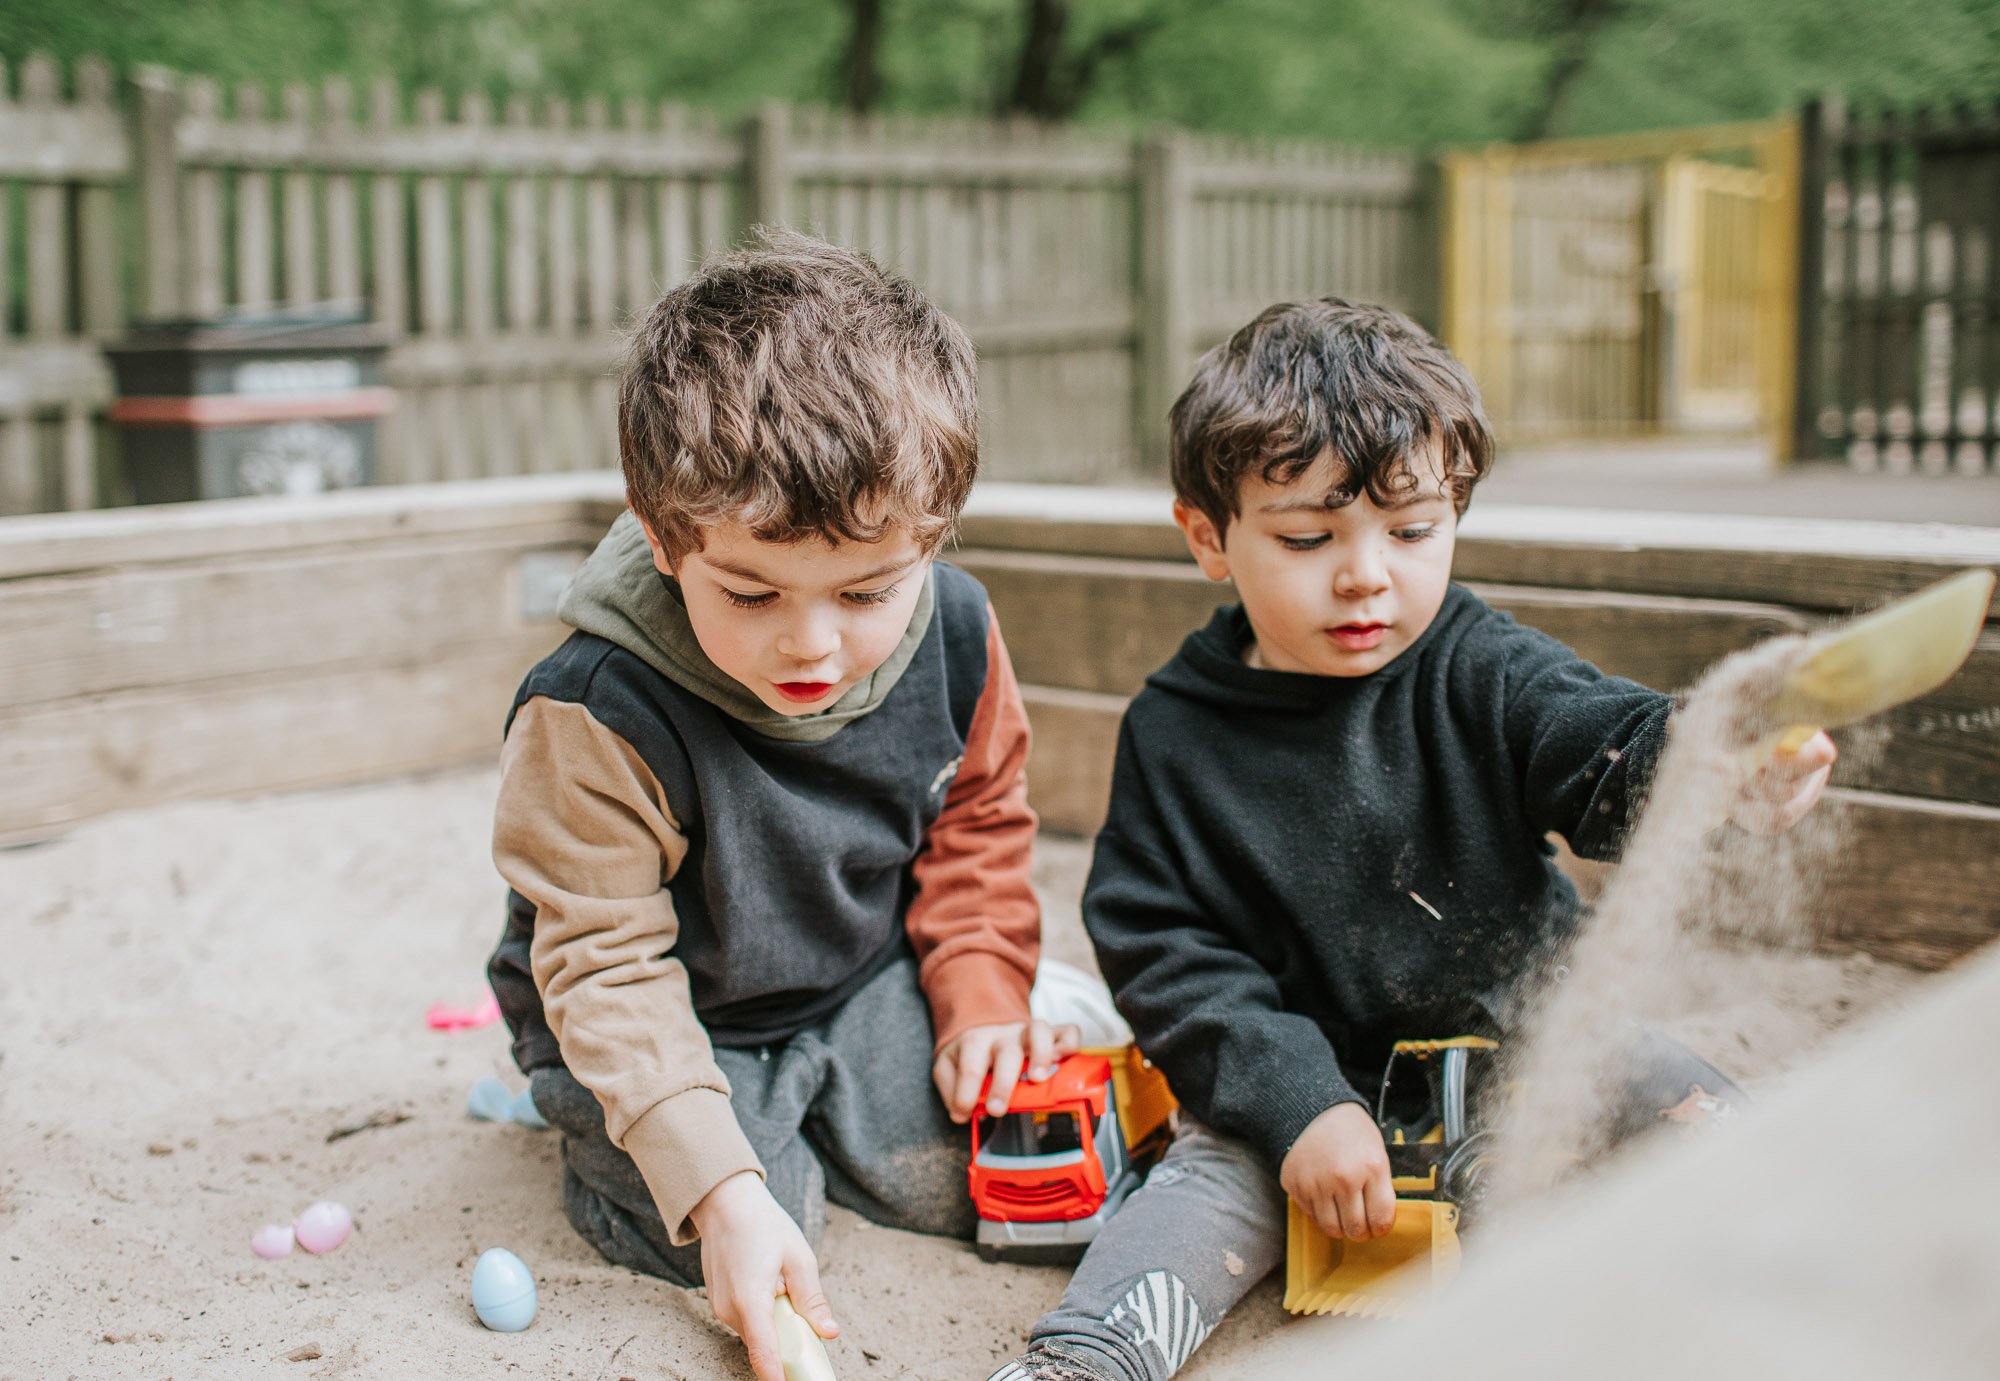 Two young boys playing in the sandpit in Highgate Woods.